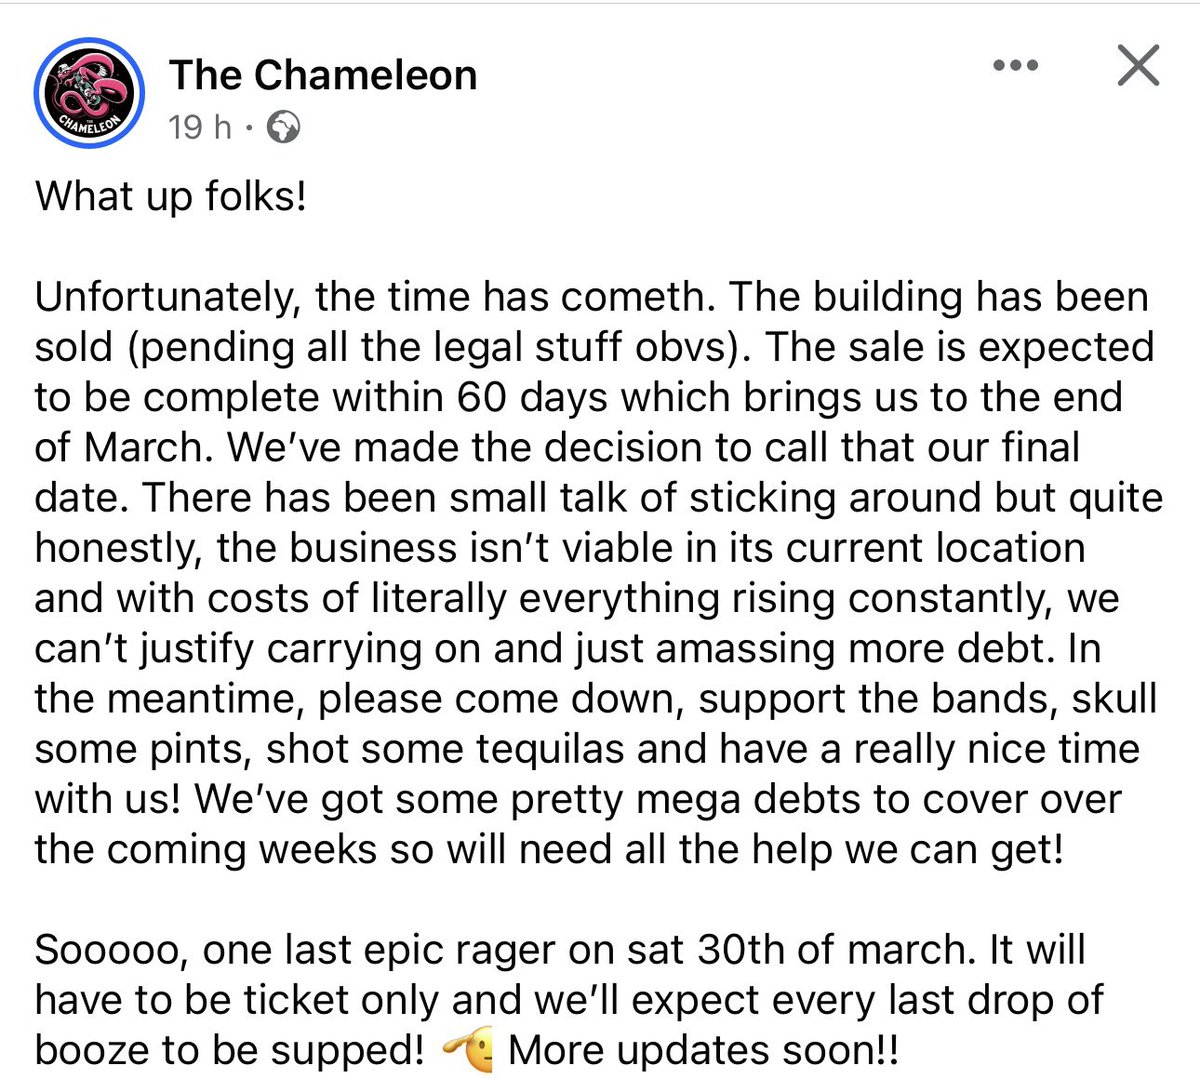 Not everything is rosy in Nottingham right now. The sad news about The Chameleon closing next month will leave a huge hole in the city’s music scene. Nottingham really doesn’t need any more student flats or corporate office blocks, thanks 😡